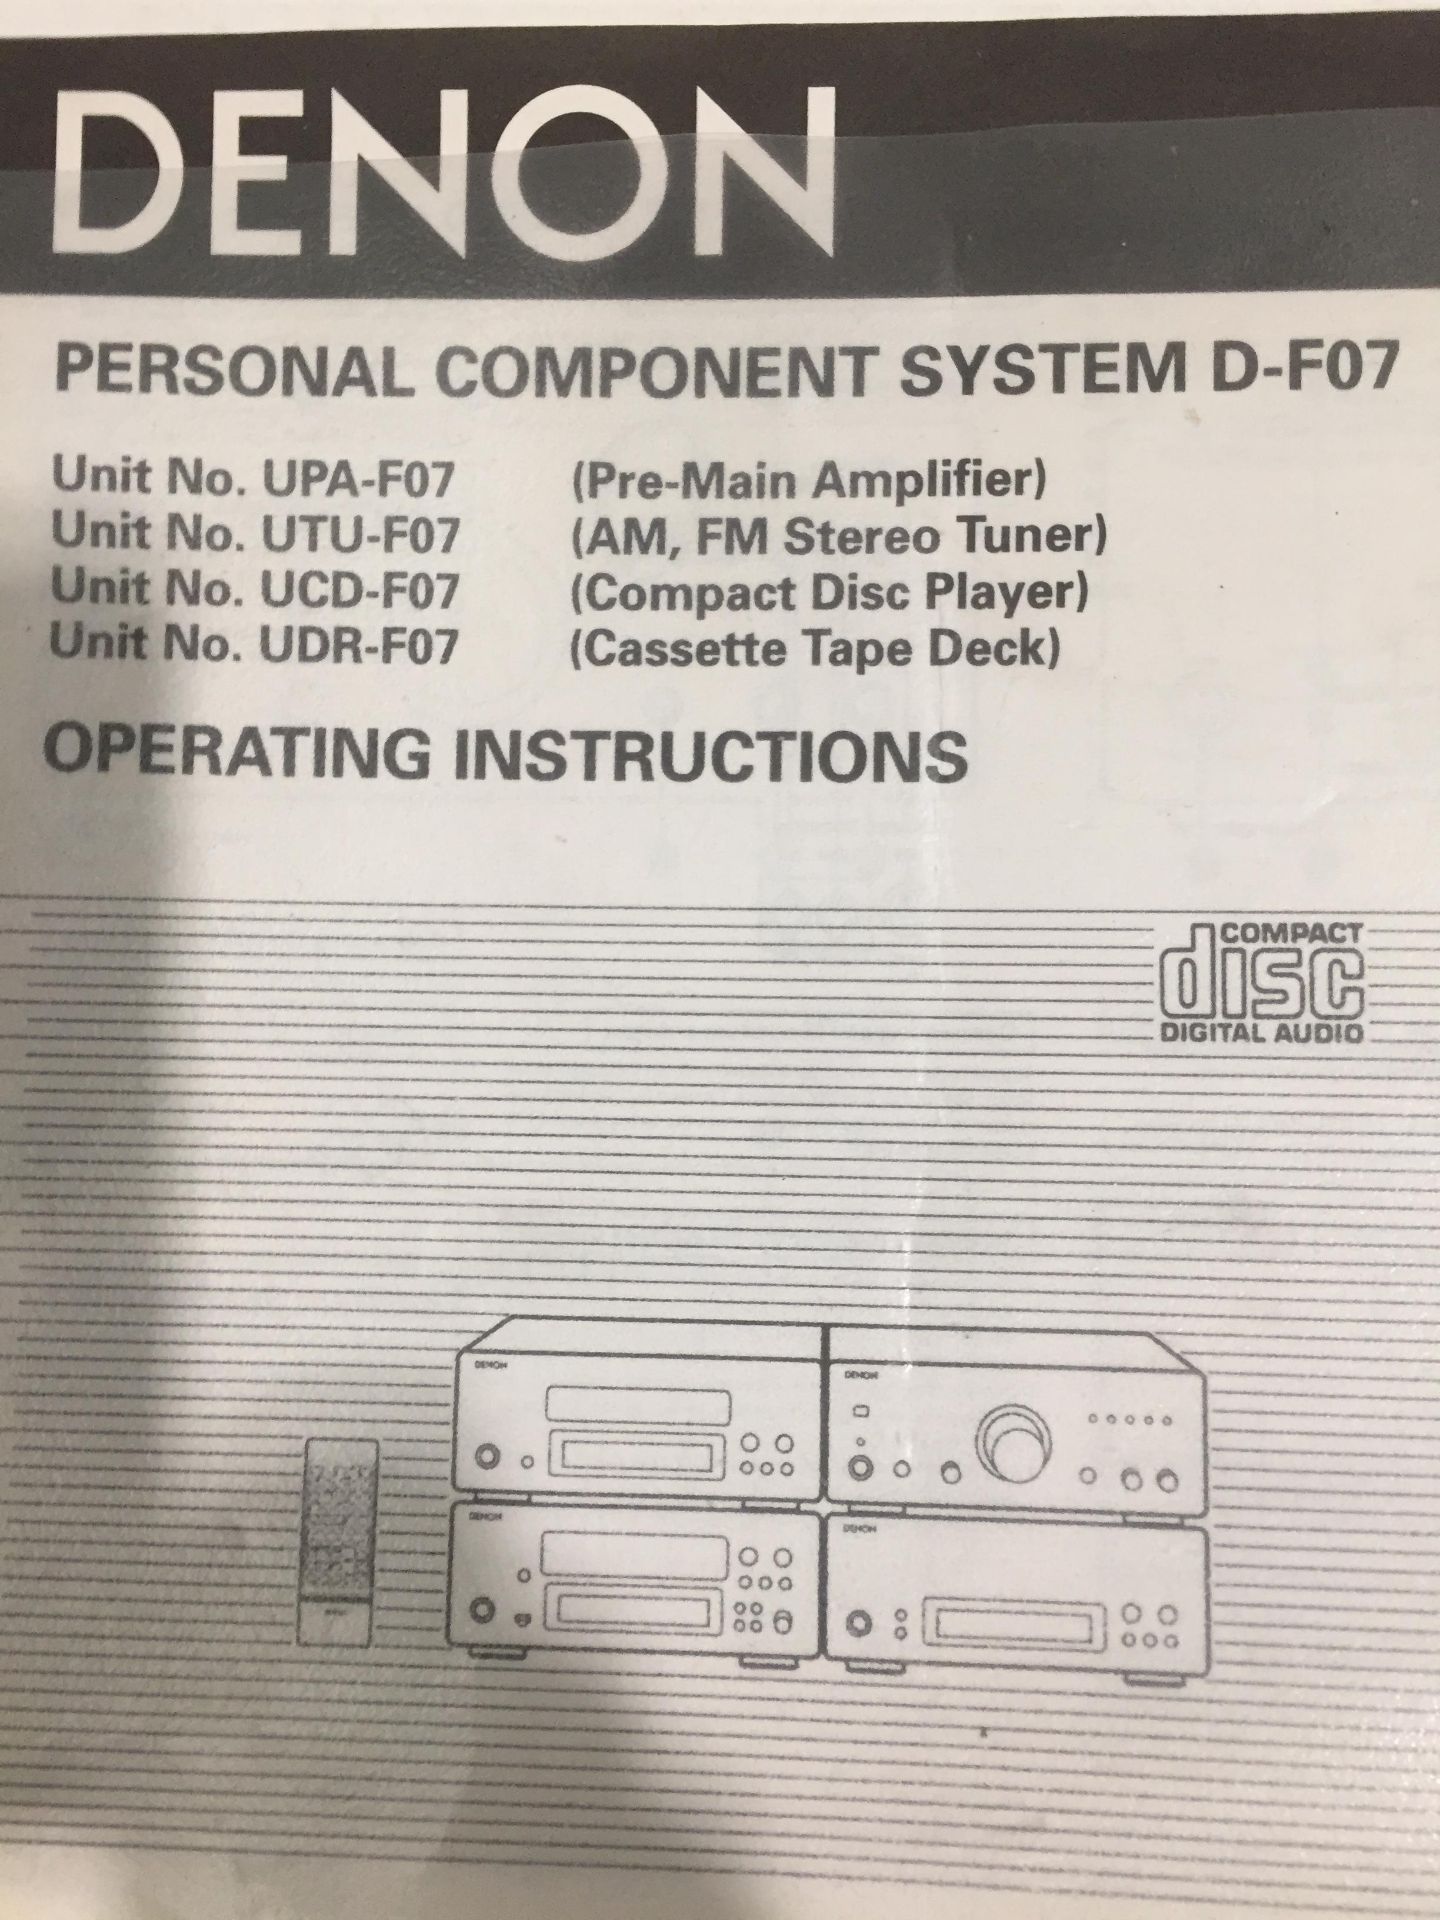 Denon D-F07 Personal Component System: UPA Pre-Main Amplifier, UTU AM FM Stereo Tuner, - Image 4 of 4